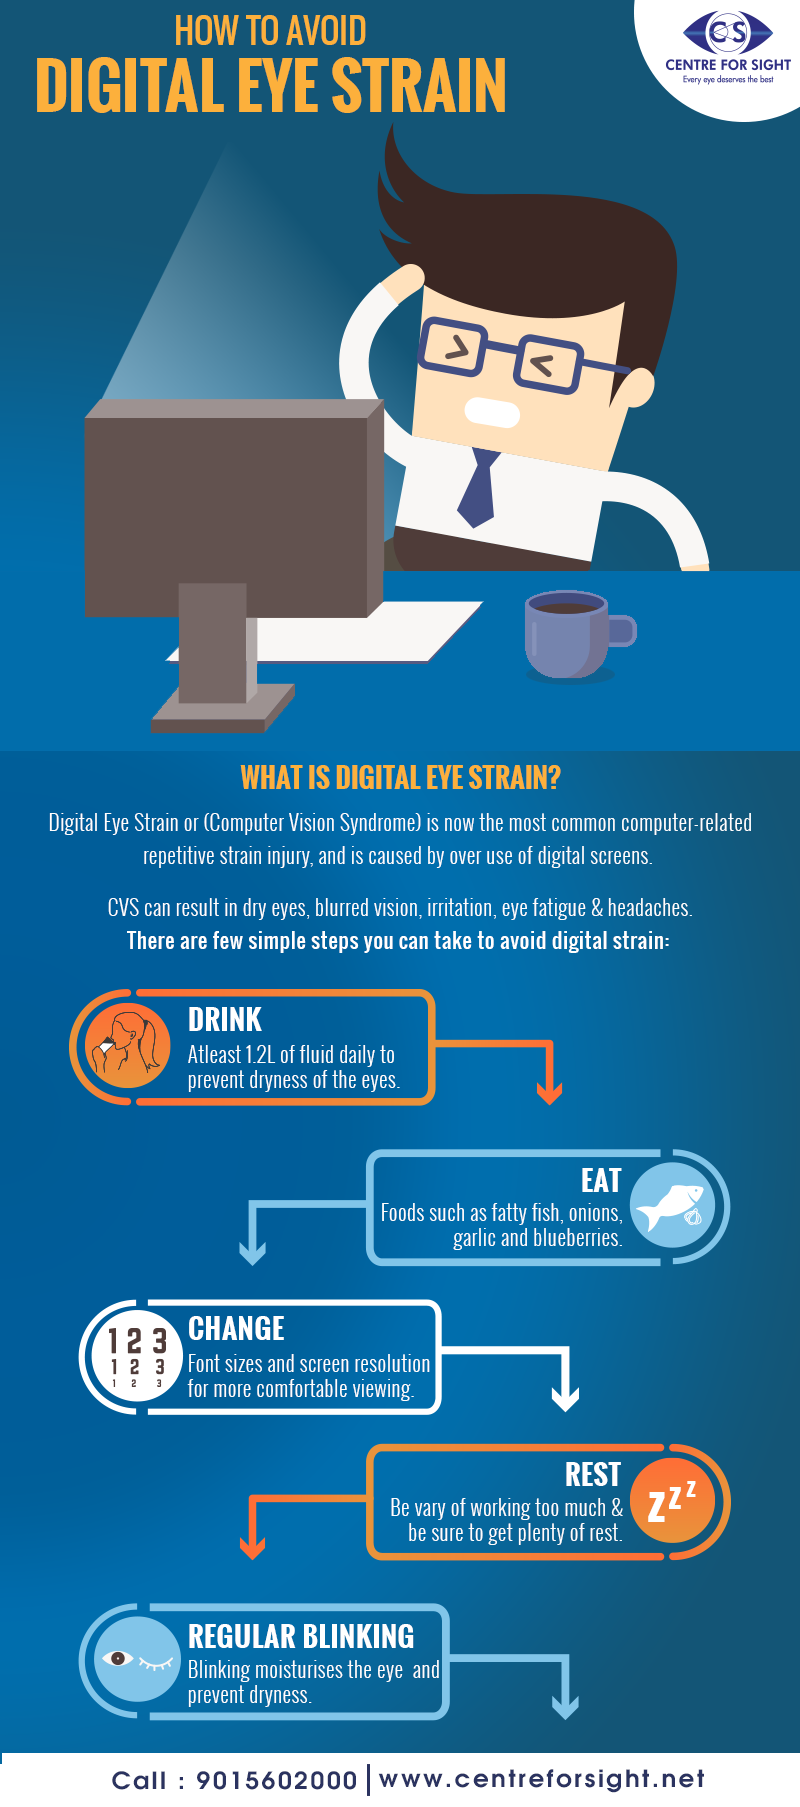 What is Digital Eye Strain? Digital Eye Strain or (Computer Vision Syndrome) is now the most common computer-related repetitive strain injury, and is caused by over use of digital screens. CVS can result in dry eyes, blurred vision, irritaion, eye fatigue & headaches. by centreforsight